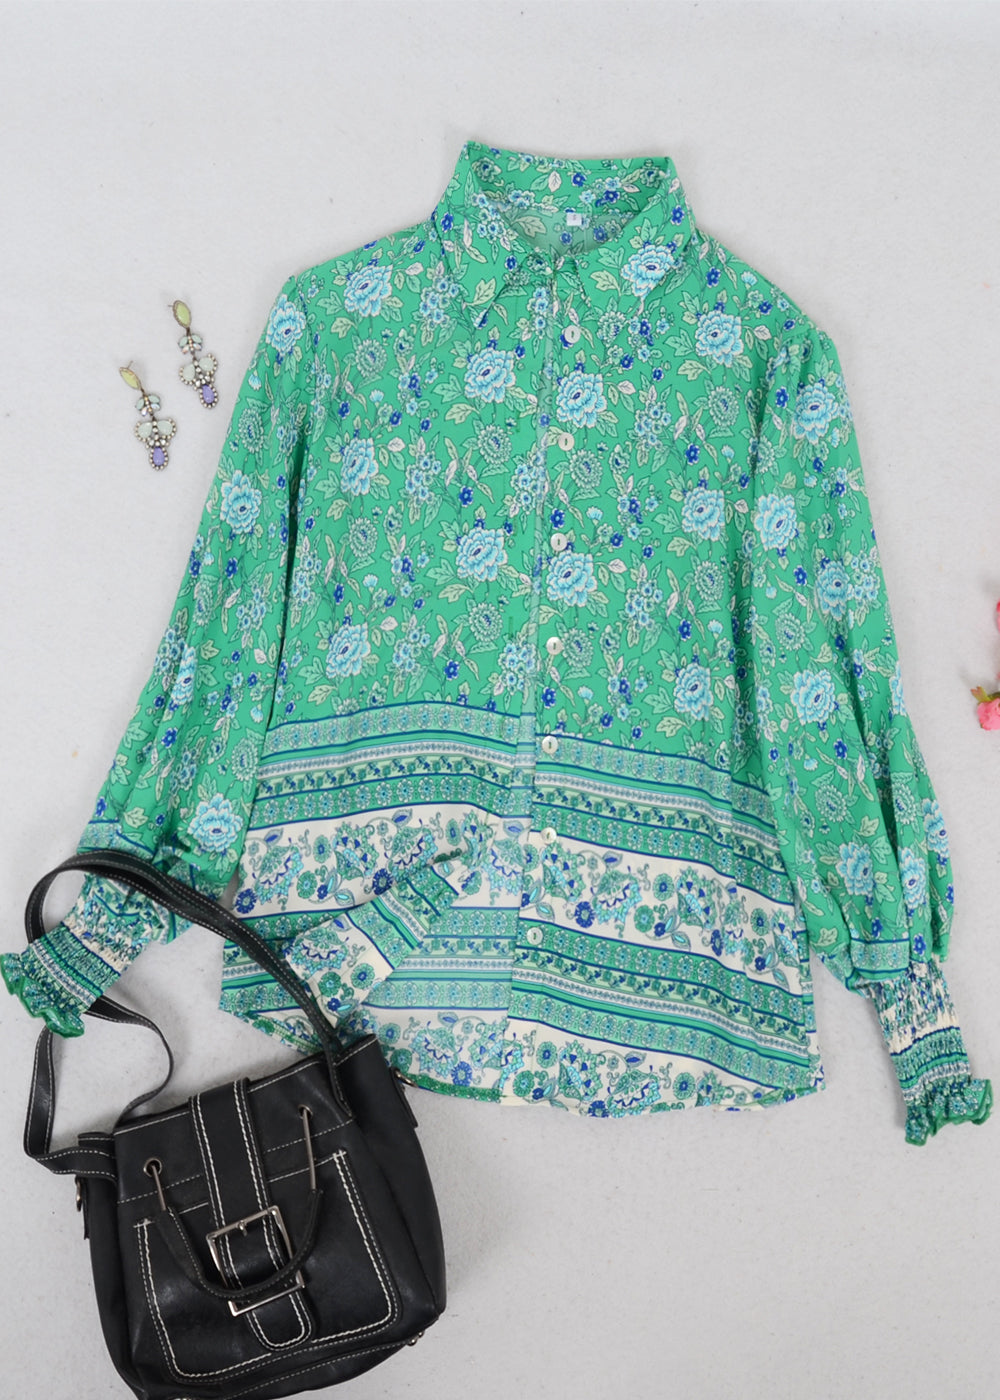 Oriental Floral Collared Shirt